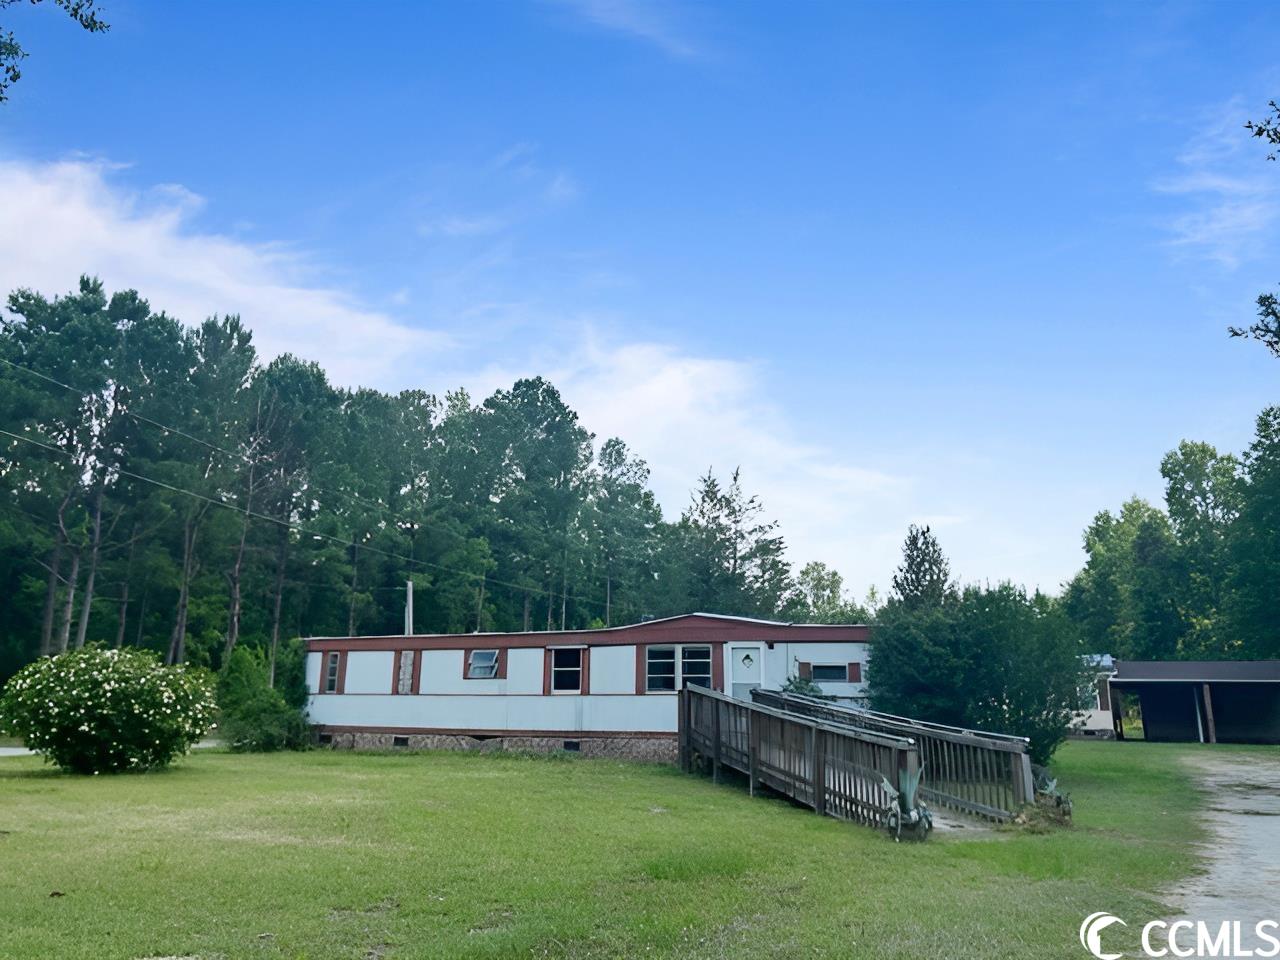 single wide 2 bedroom 1 bathroom located on large lot near downtown conway. there is also a double wide mobile home on the property also. access will not be allowed in either home due to condition. call your agent today for more details.